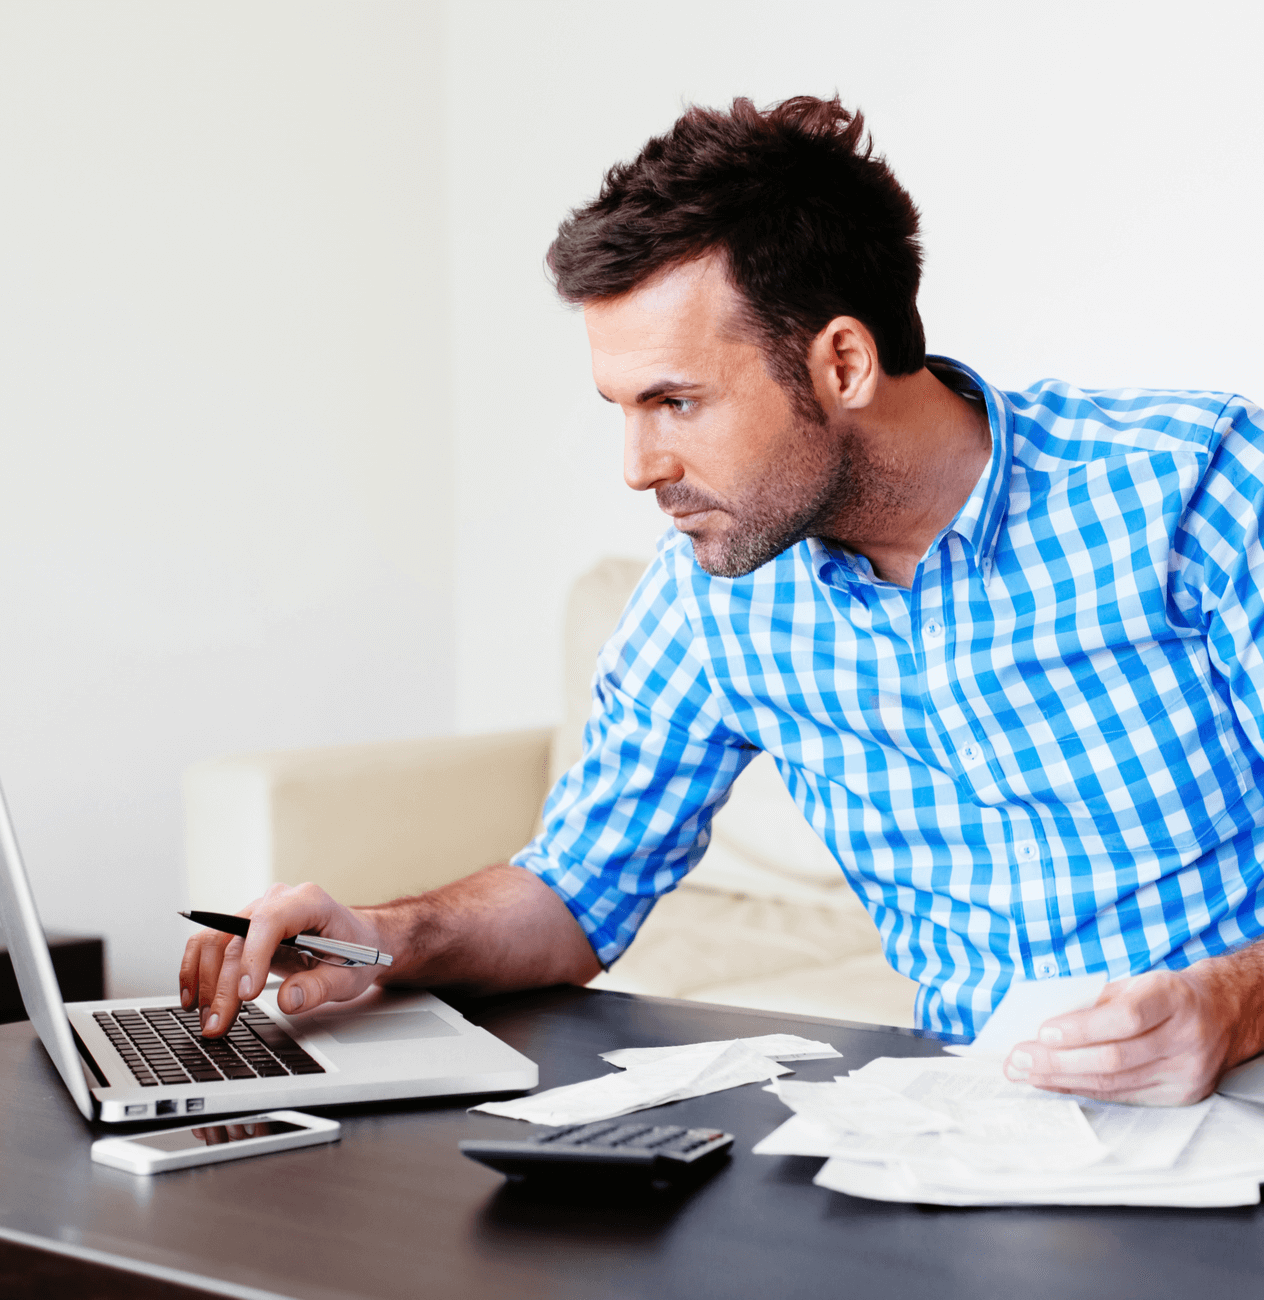 Caucasian man in a blue checkered shirt working on a laptop computer.